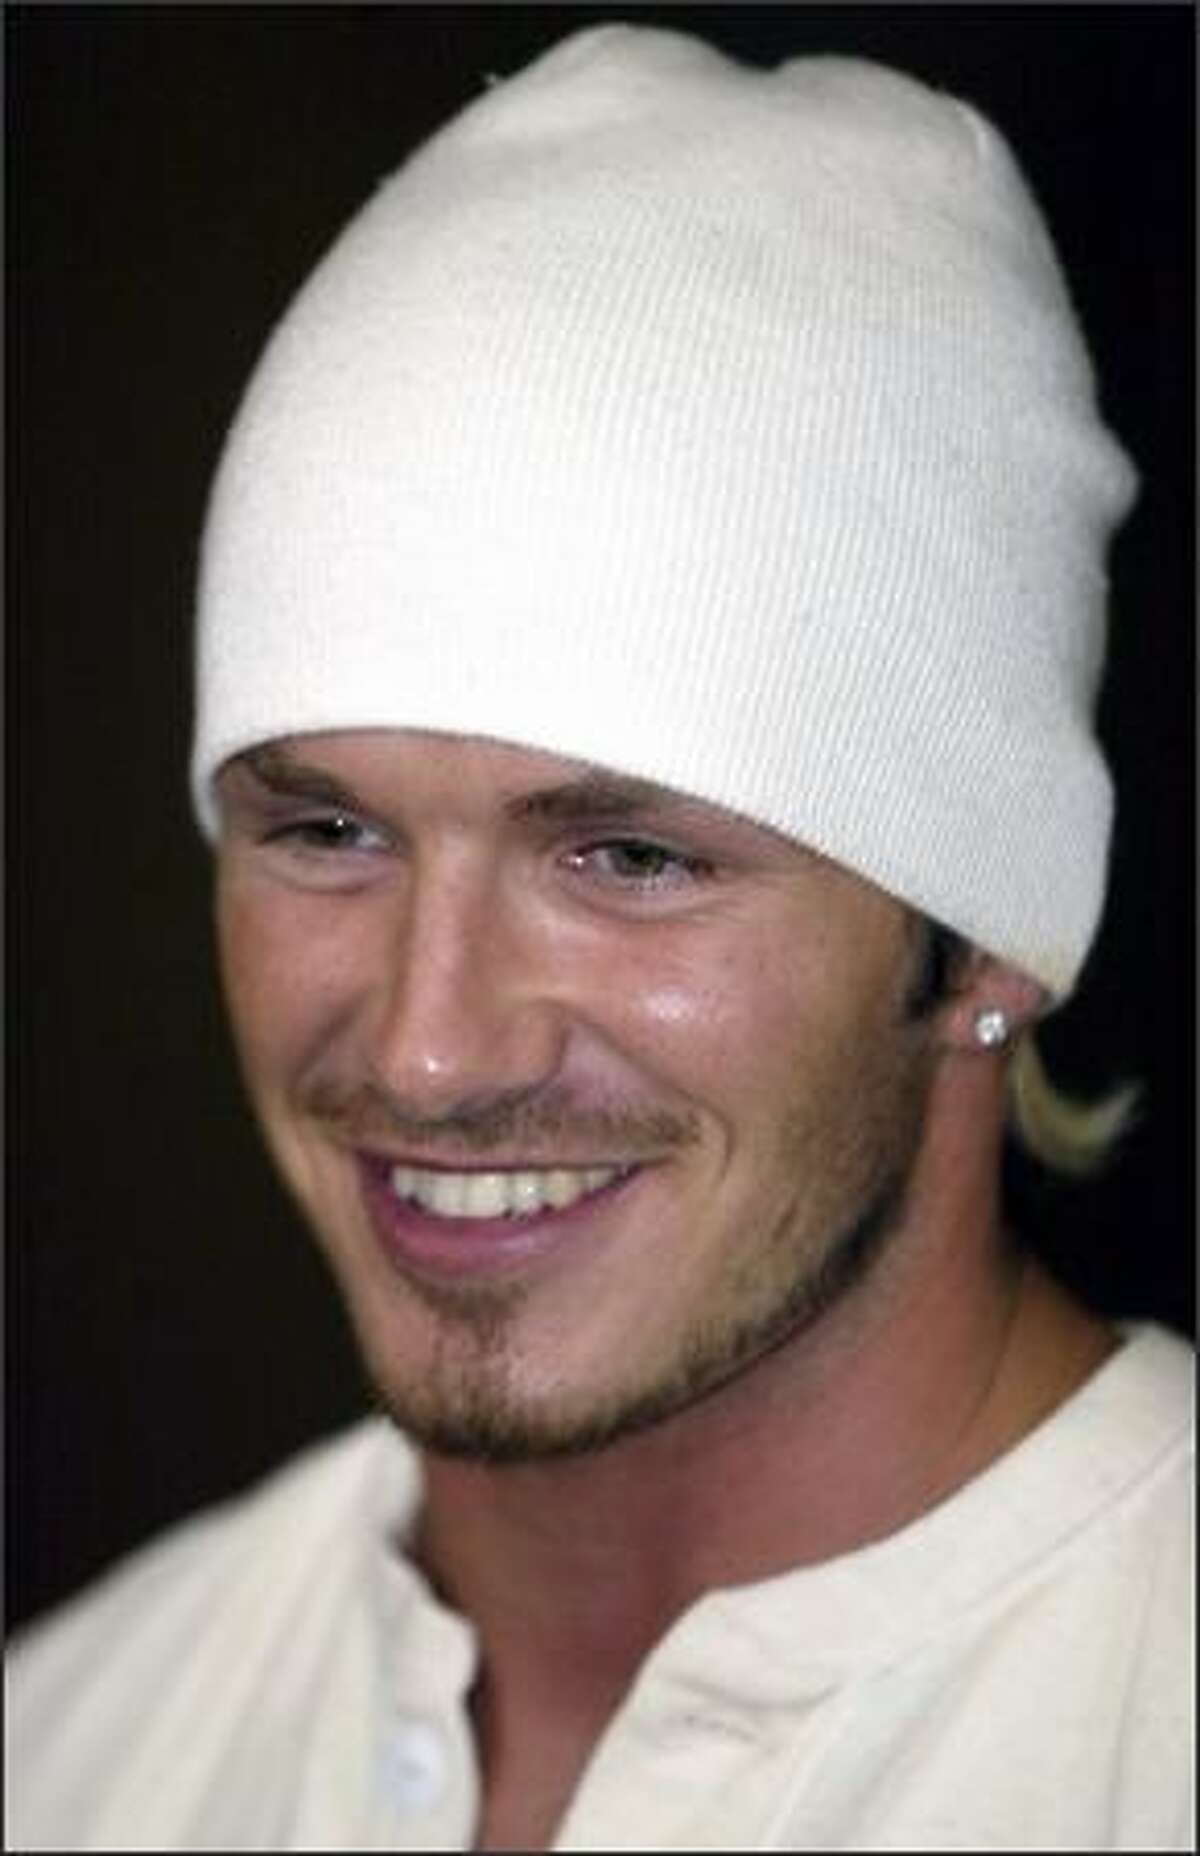 David Beckham greets the media as he announces the birth of his baby boy, Romeo, Sept. 1, 2002 in London.